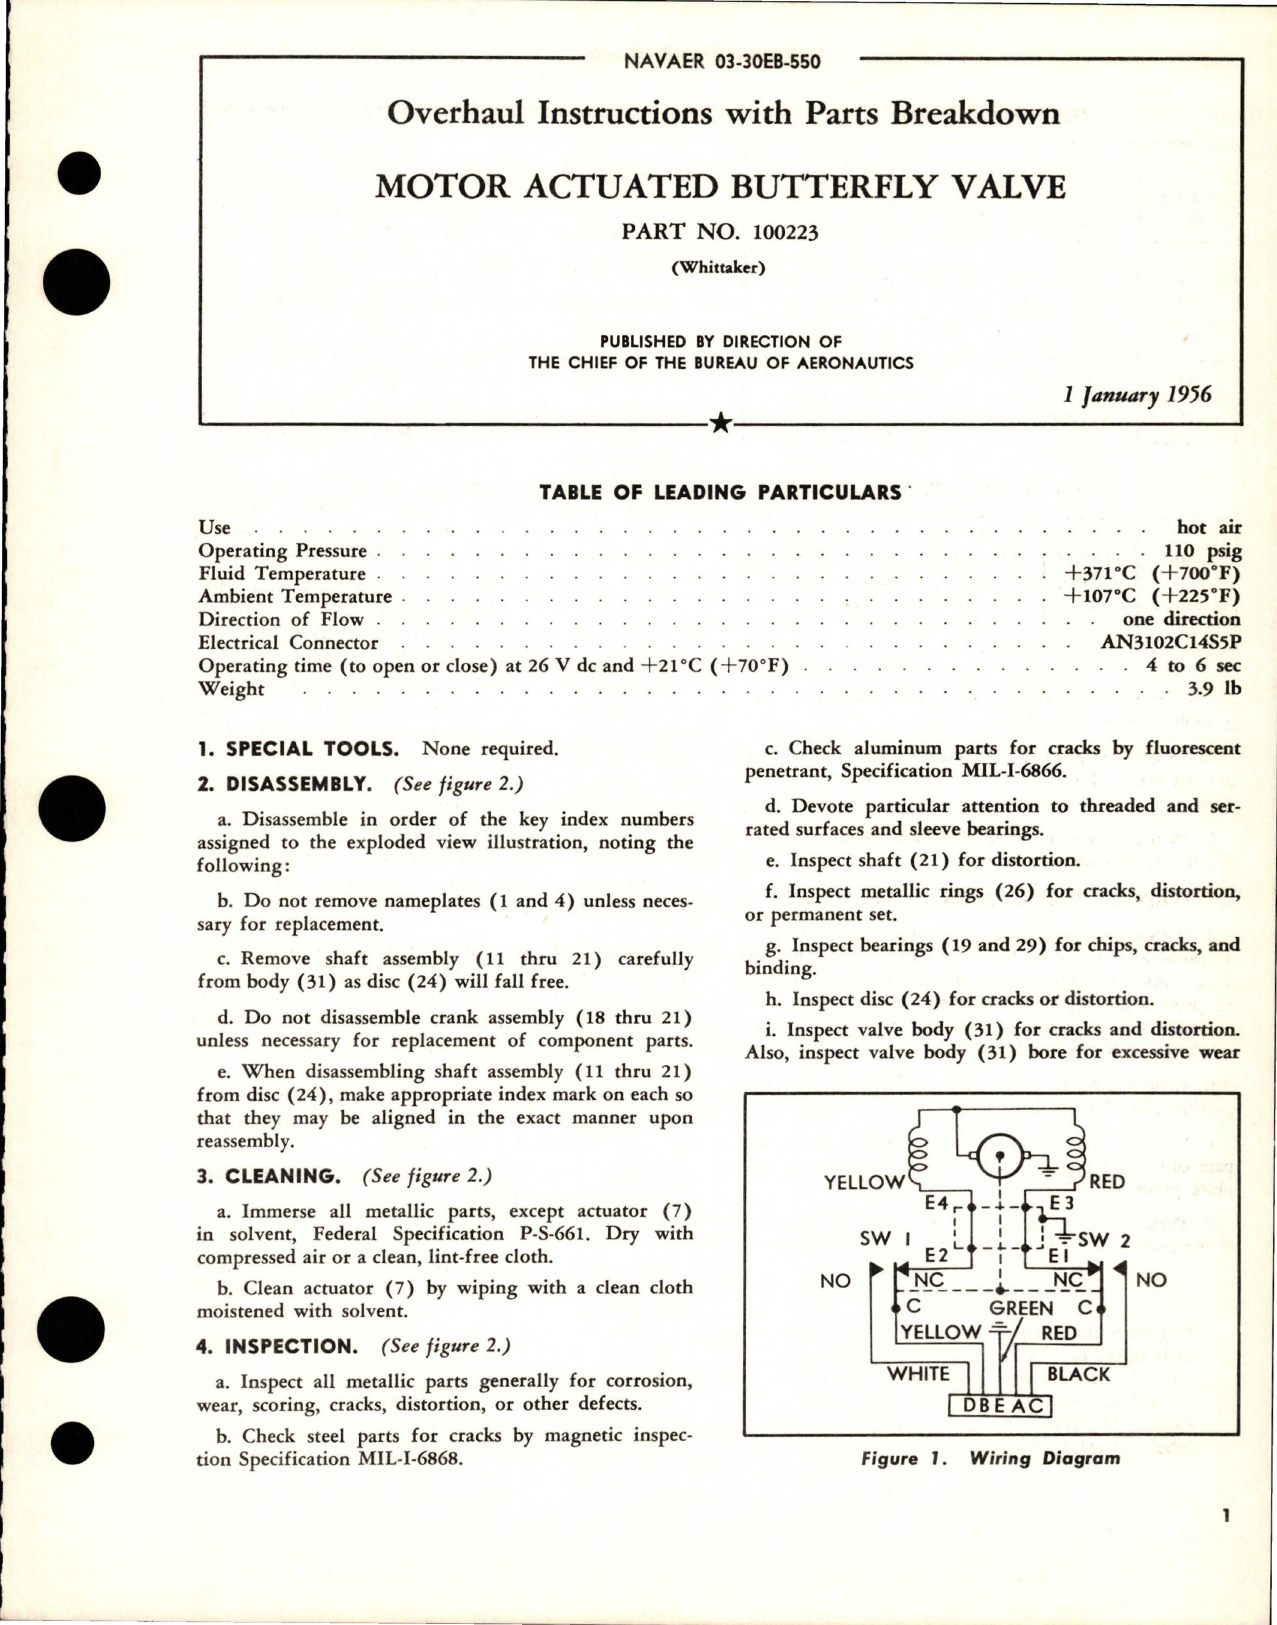 Sample page 1 from AirCorps Library document: Overhaul Instructions with Parts for Motor Actuated Butterfly Valve - Part 100223